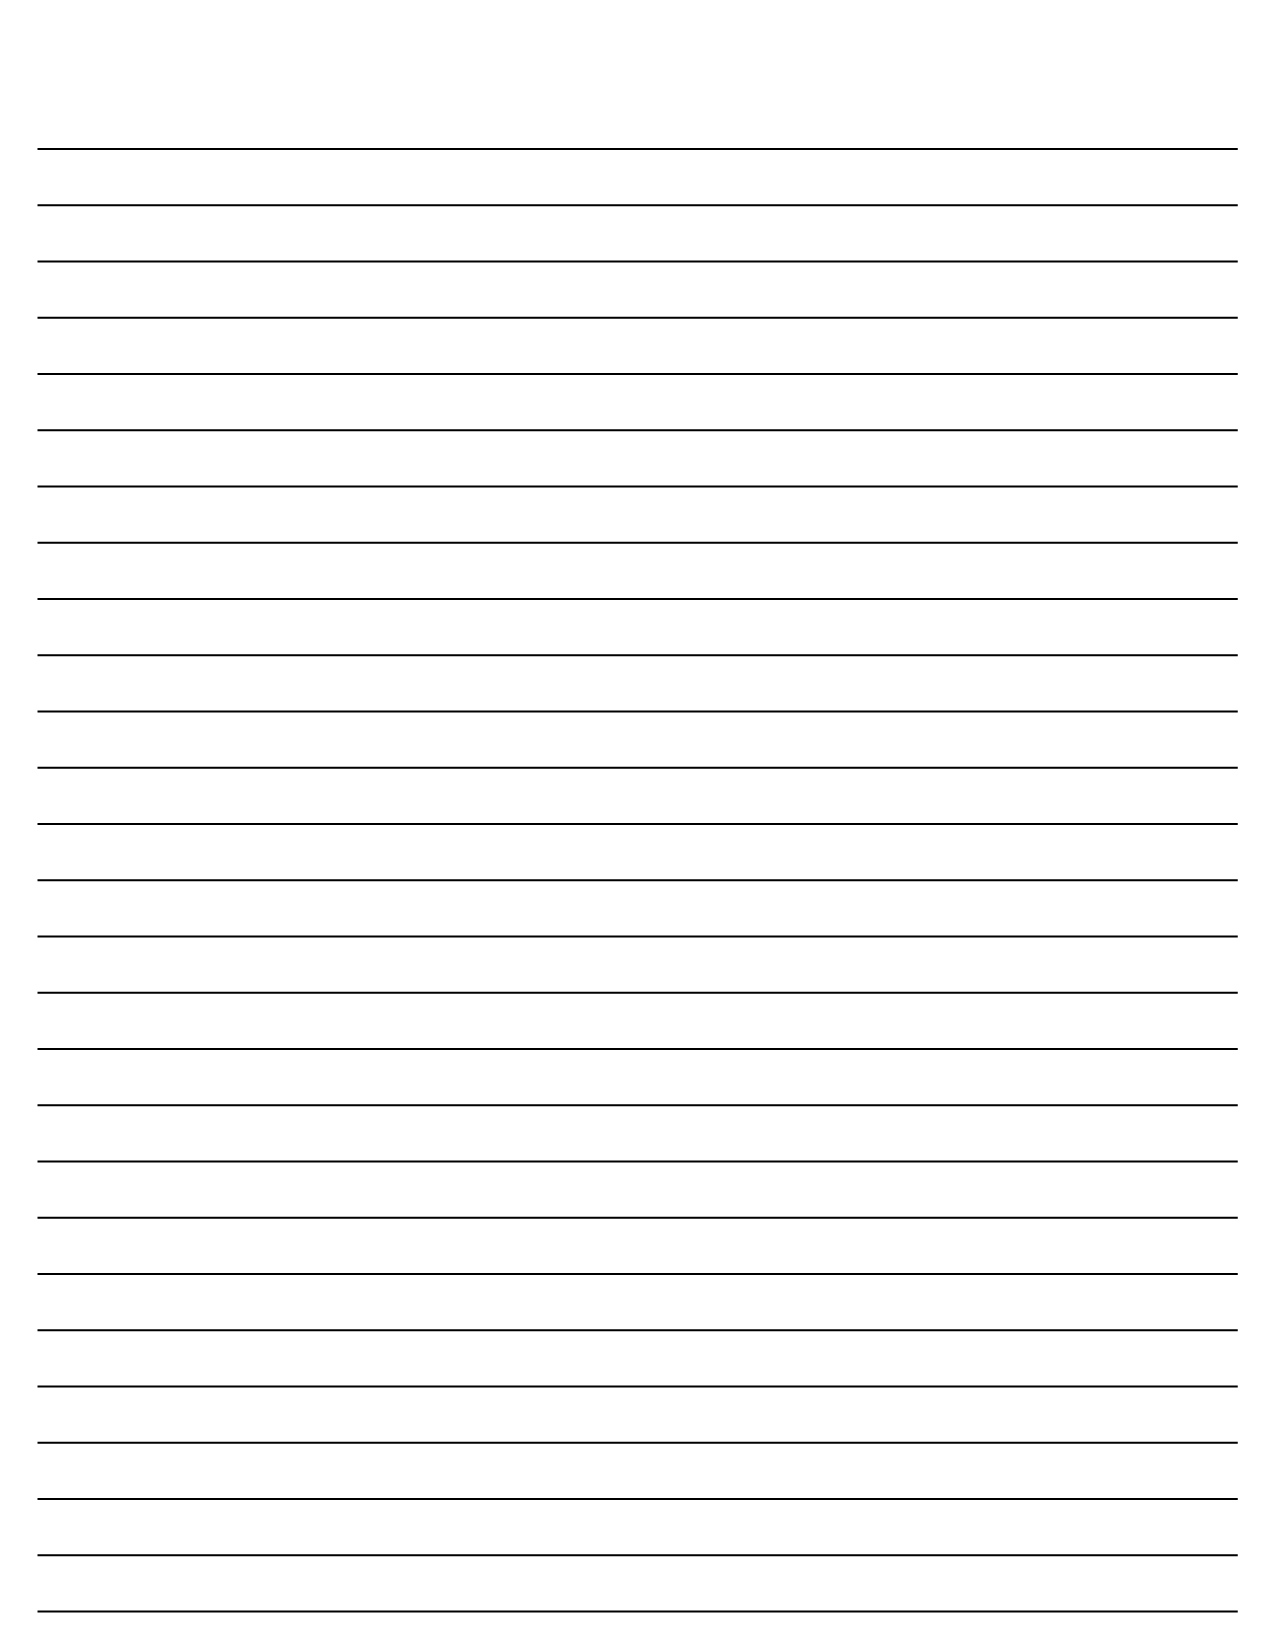 Print Lined Paper